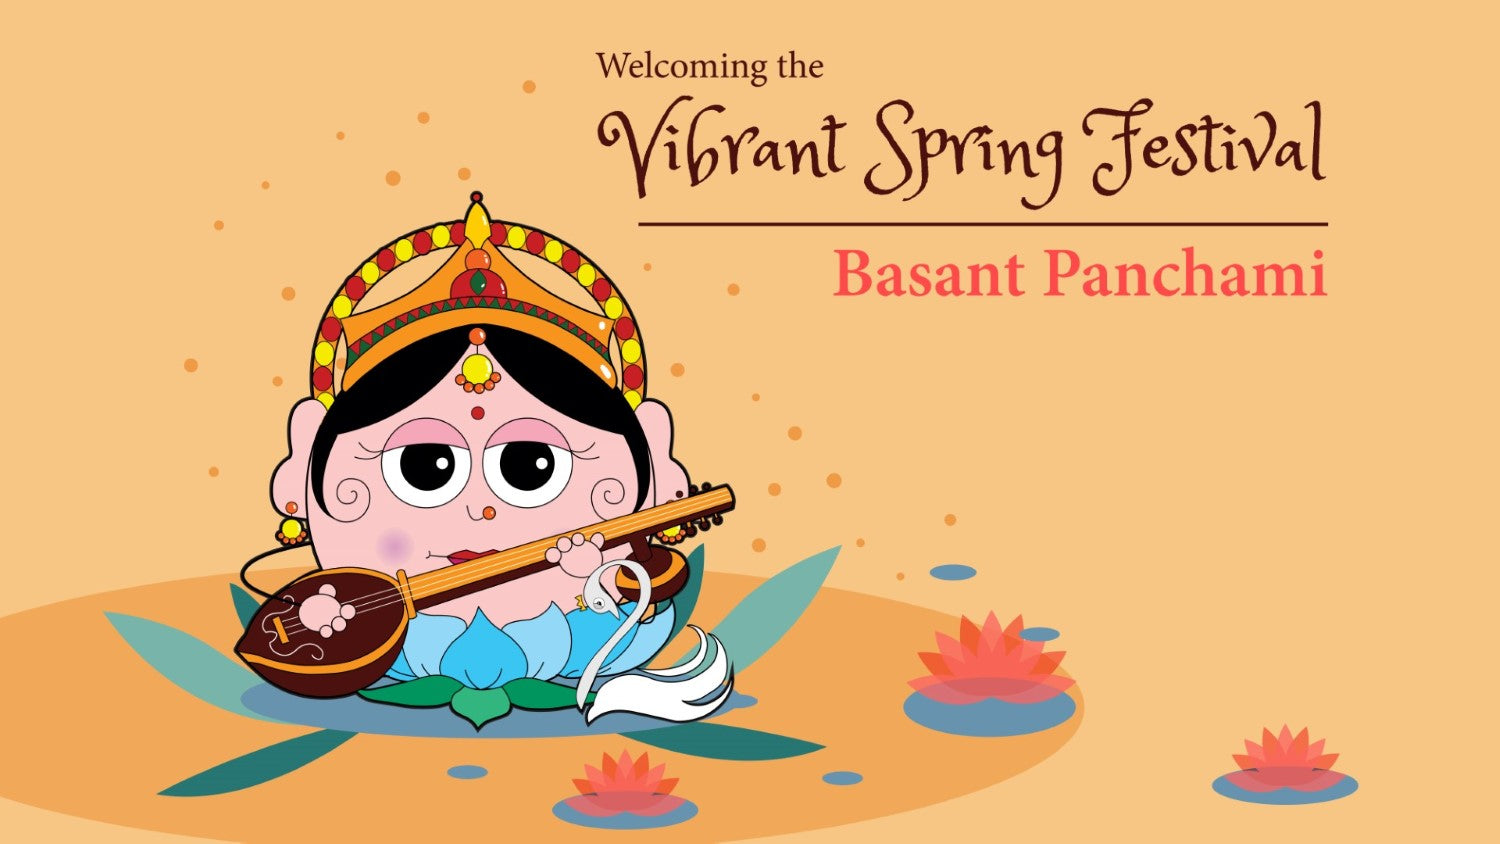 Everything to know about Basant Panchami Festival